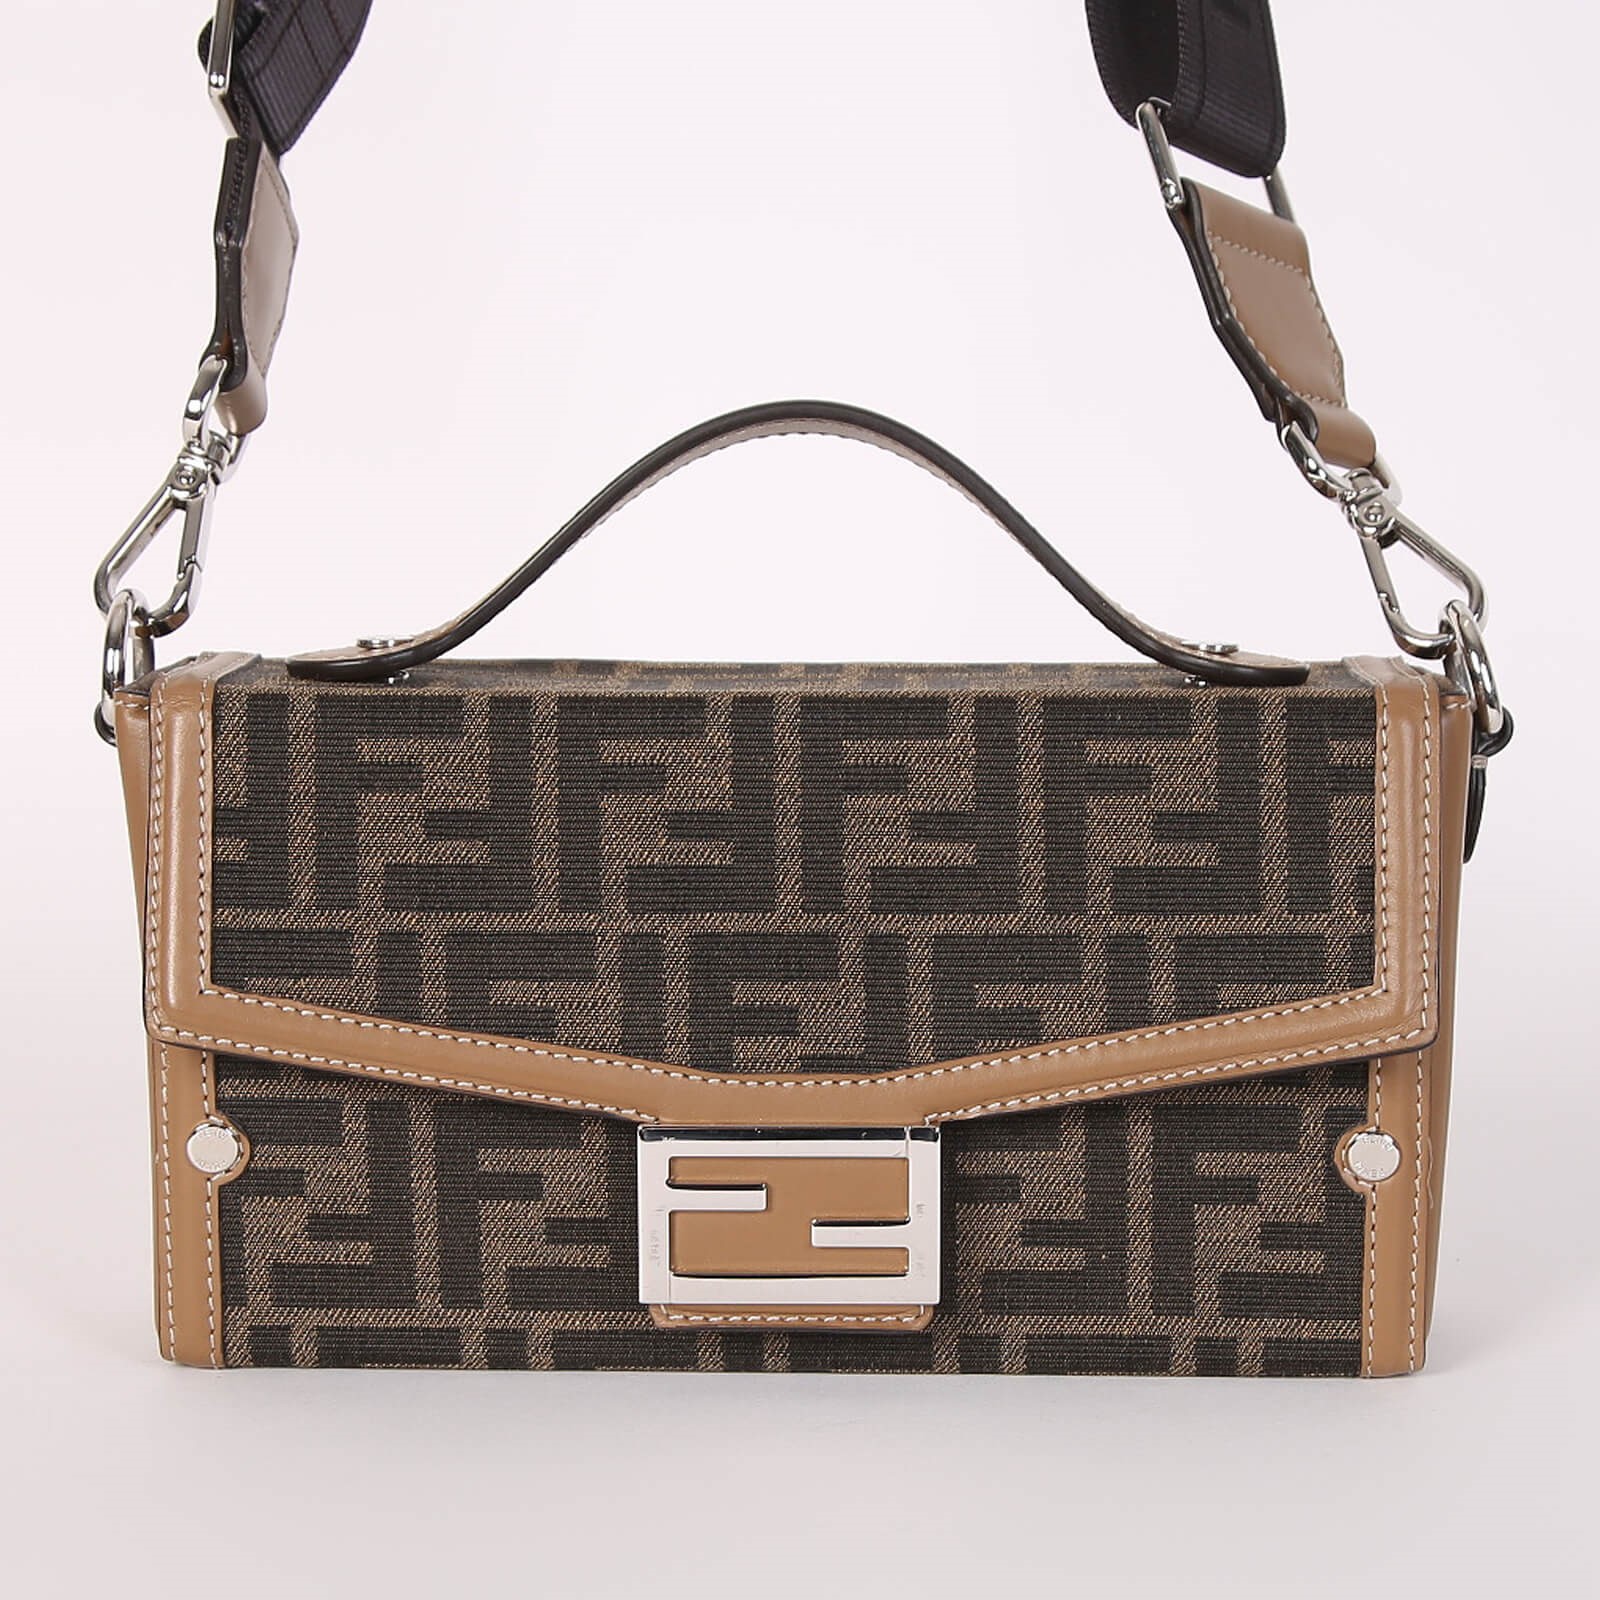 Fendi Took a Sporty Turn for Spring 2023